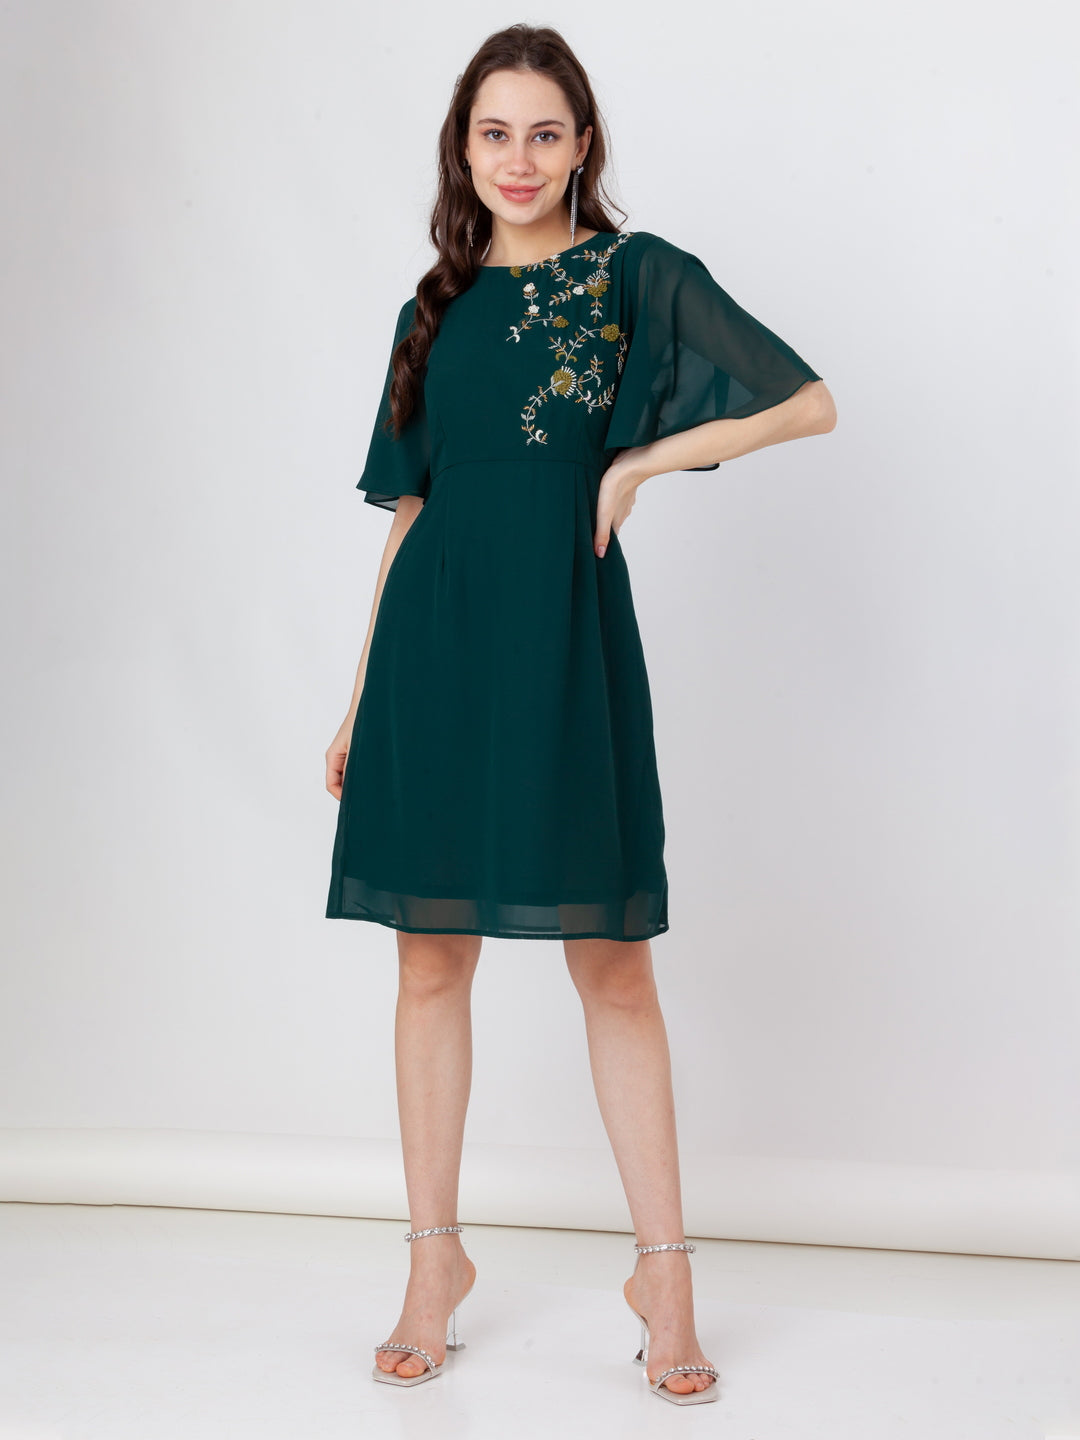 Green_Embroidered_A-Line_Short_Dress_5